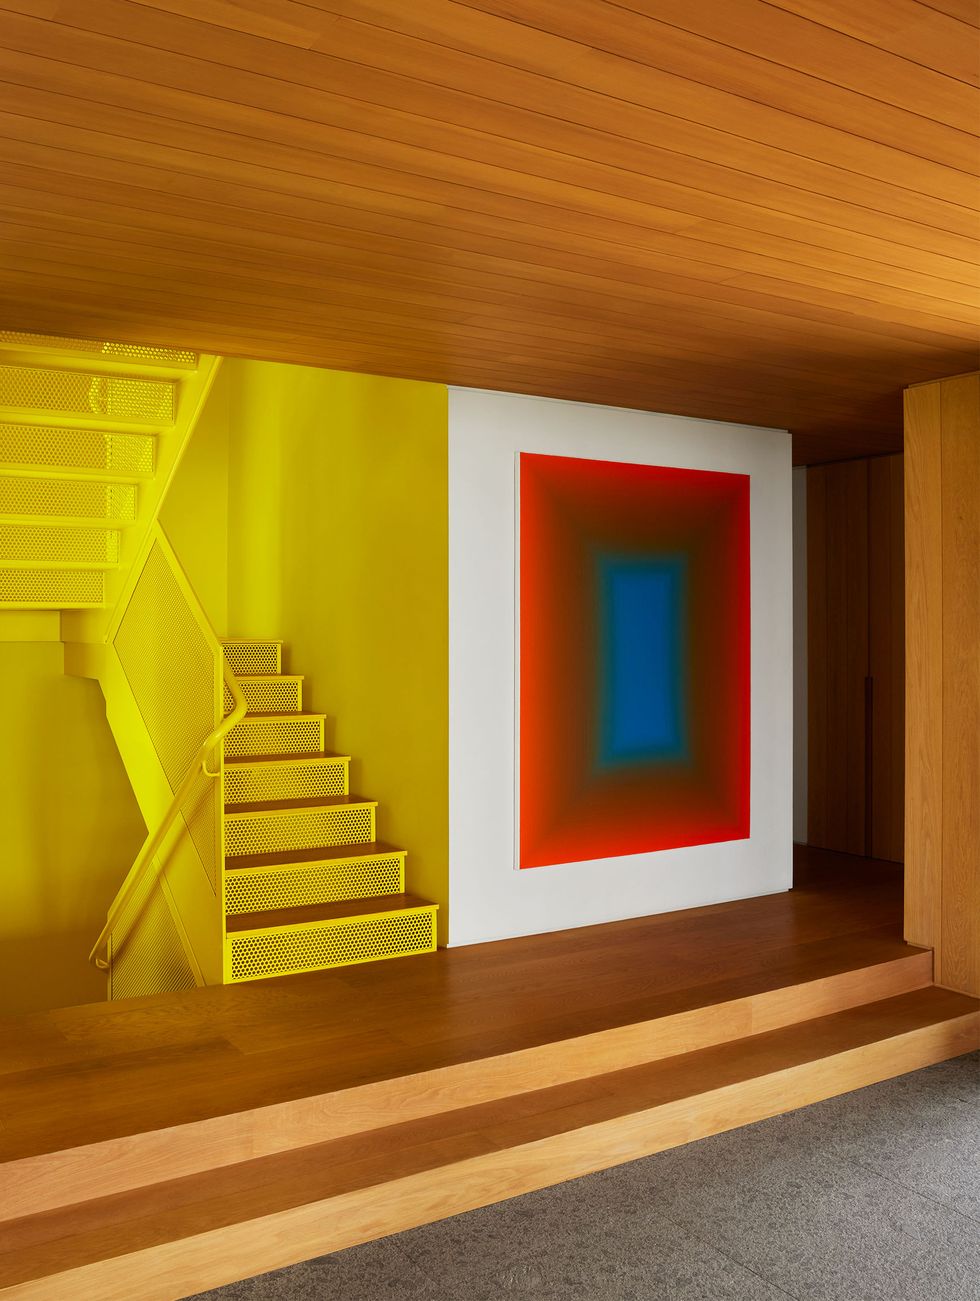 a foyer has two steps up to bright yellow industrial style staircase, wood floor, walls, and ceiling, and a large rectangular painting with a wide red border and a narrow green border around a blue center